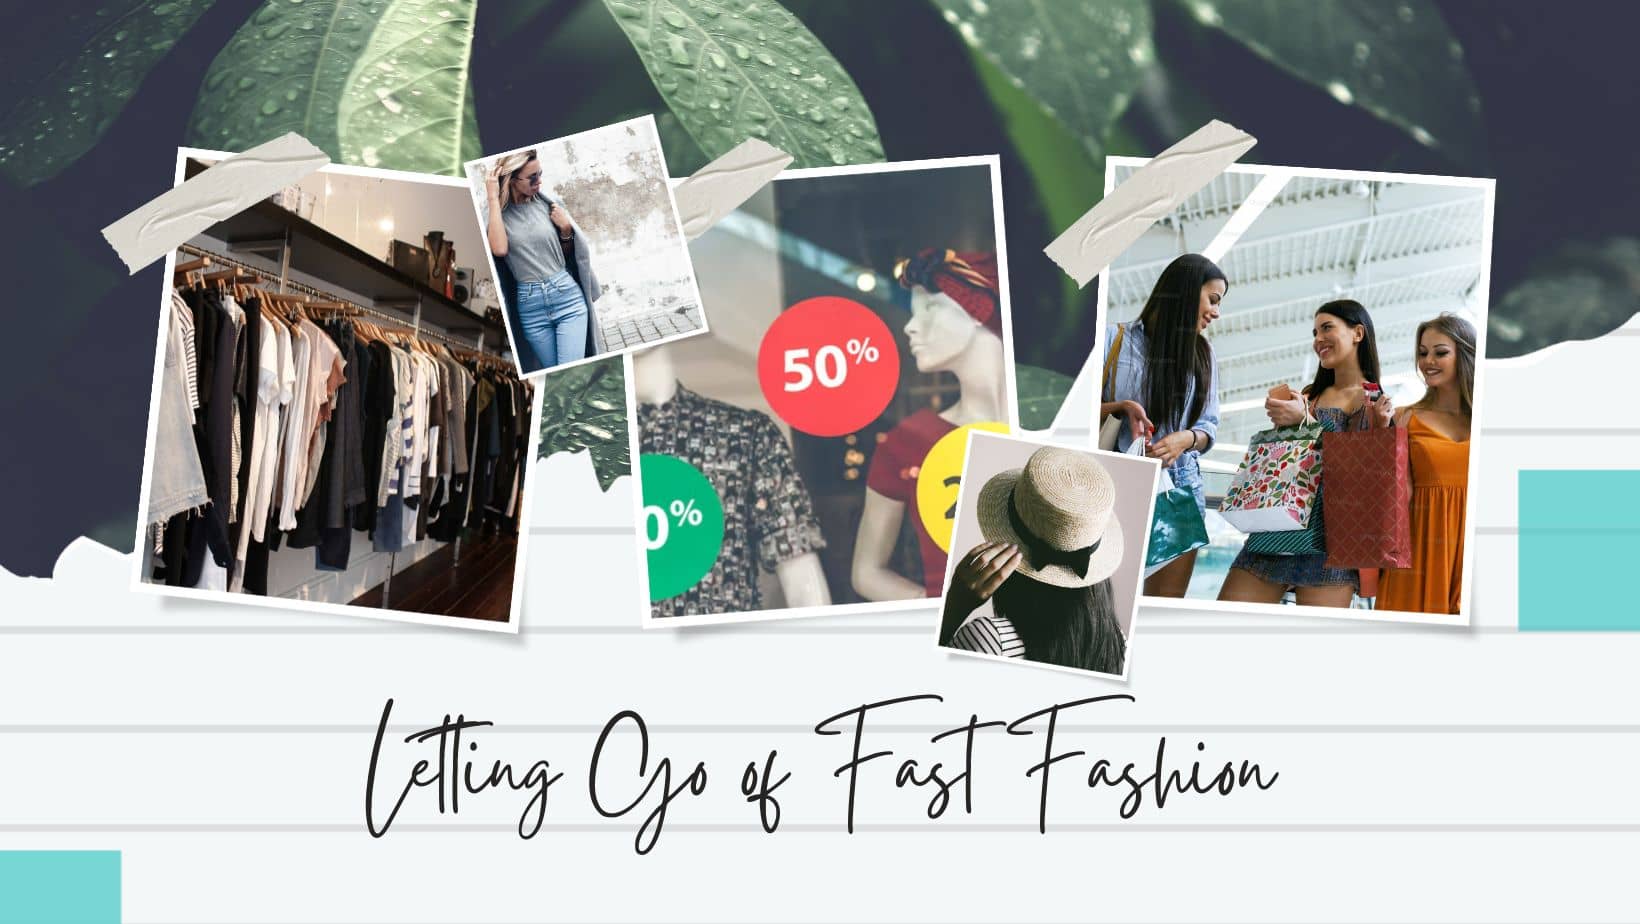 Letting go of New Fast Fashion Trends